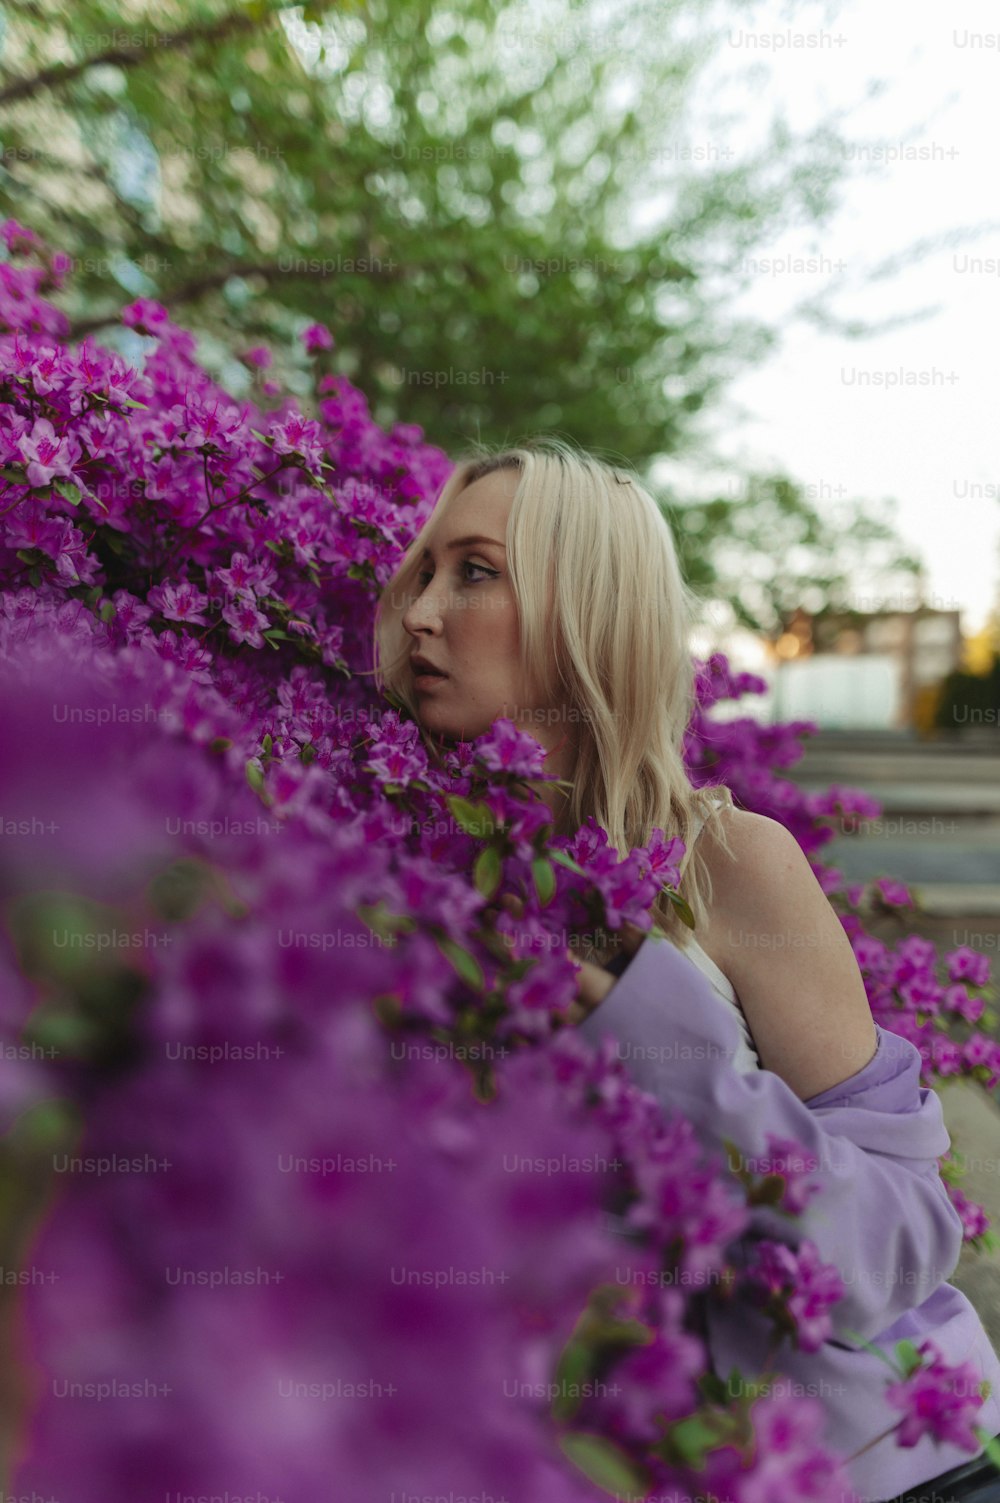 a woman in a purple top is leaning against a bush of purple flowers